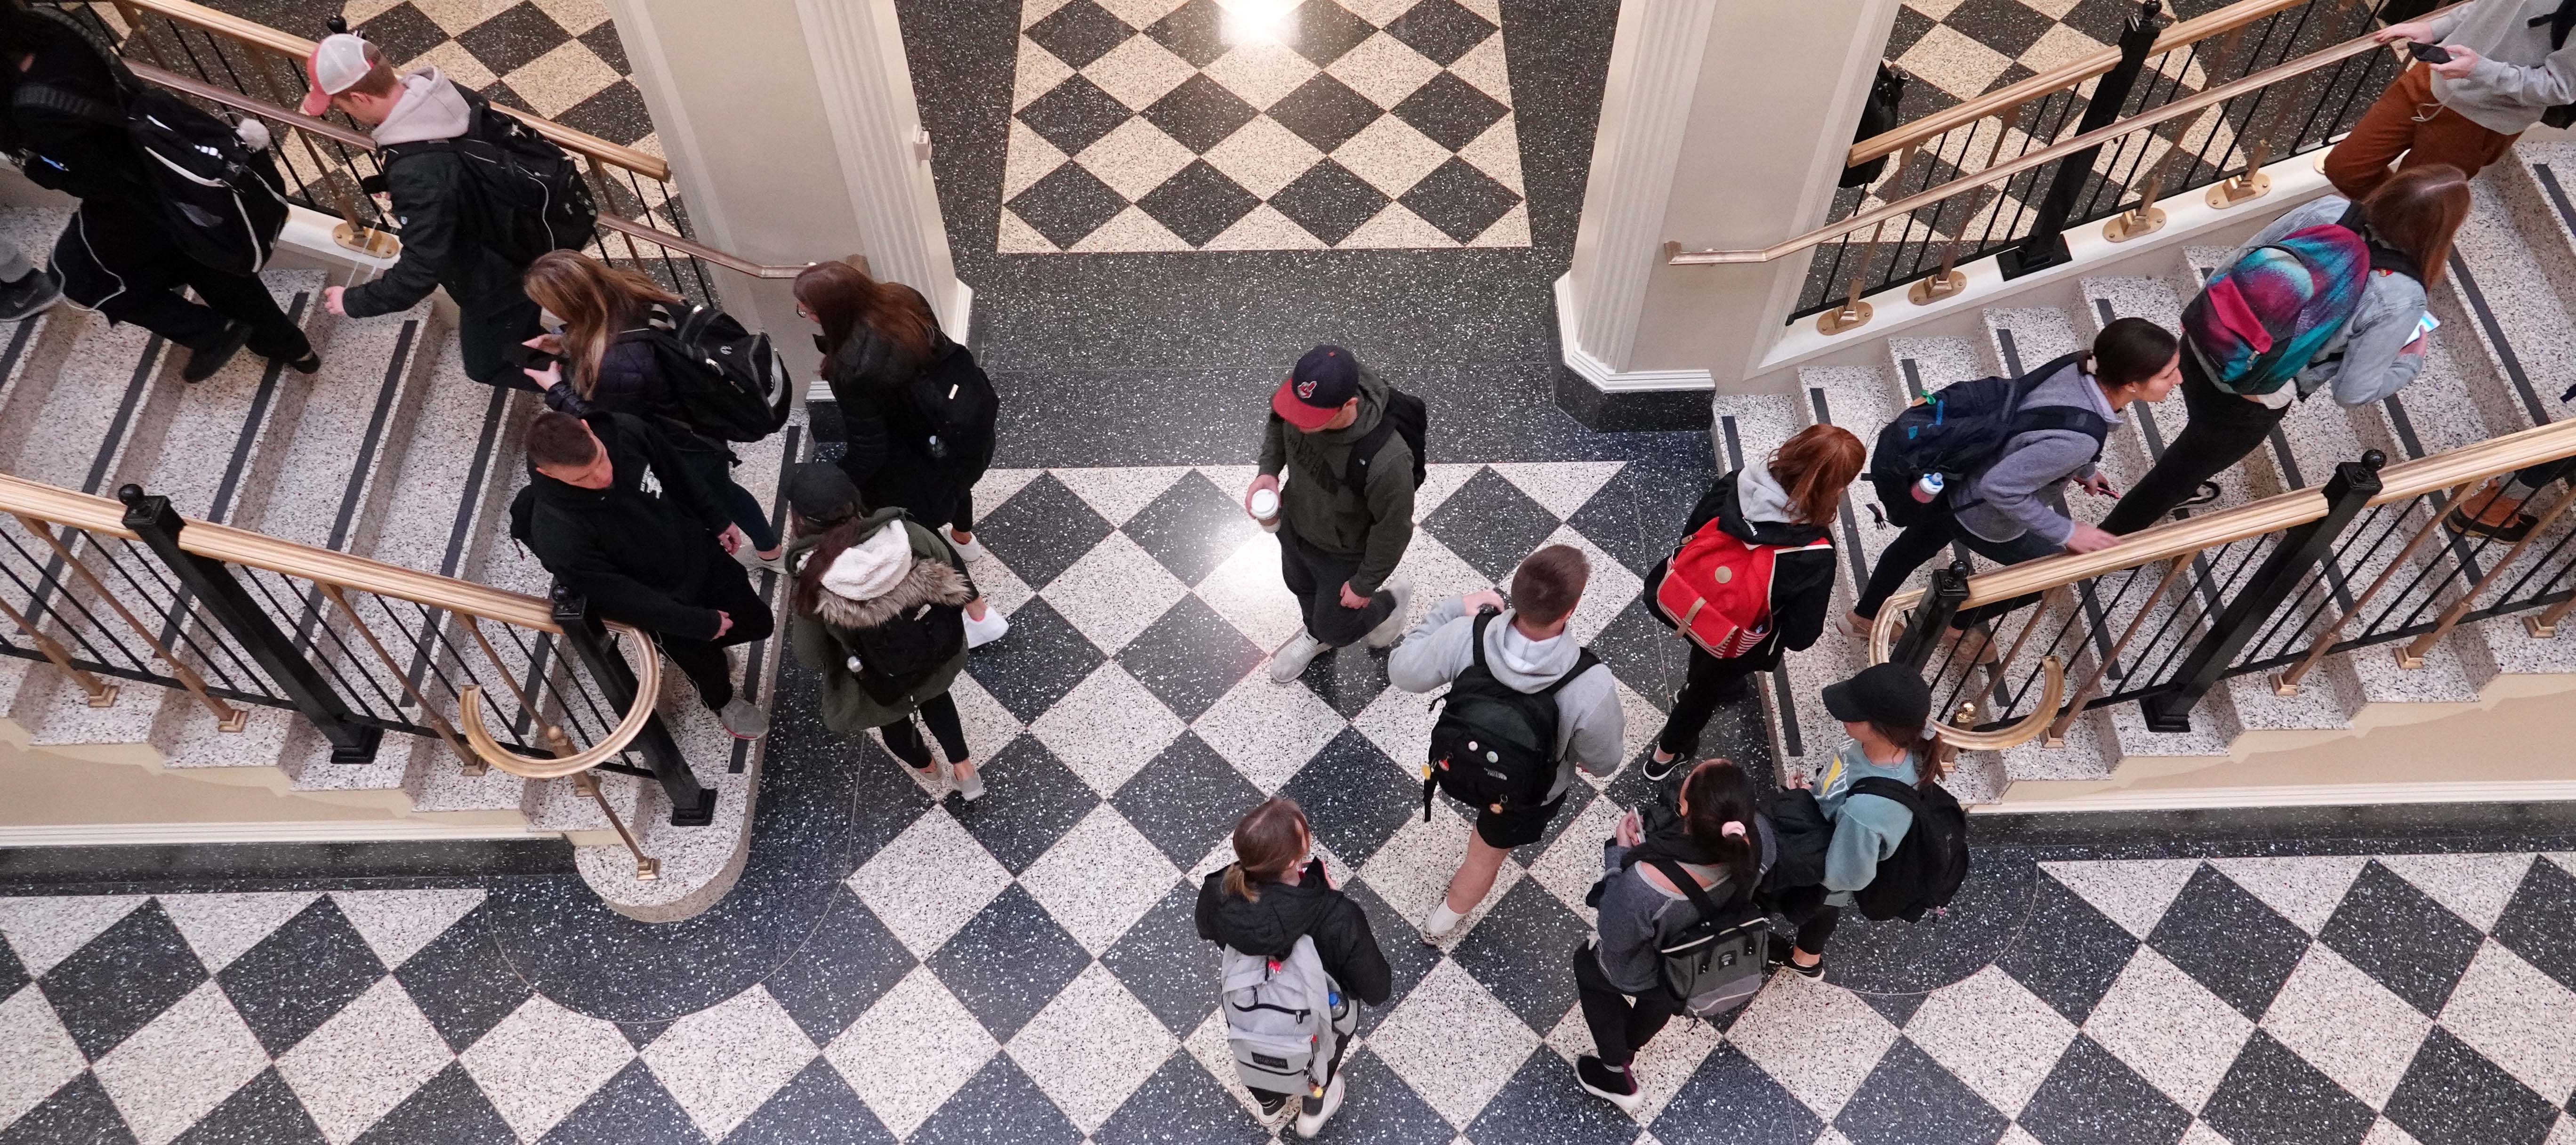  Students moving through the lower atrium during class change